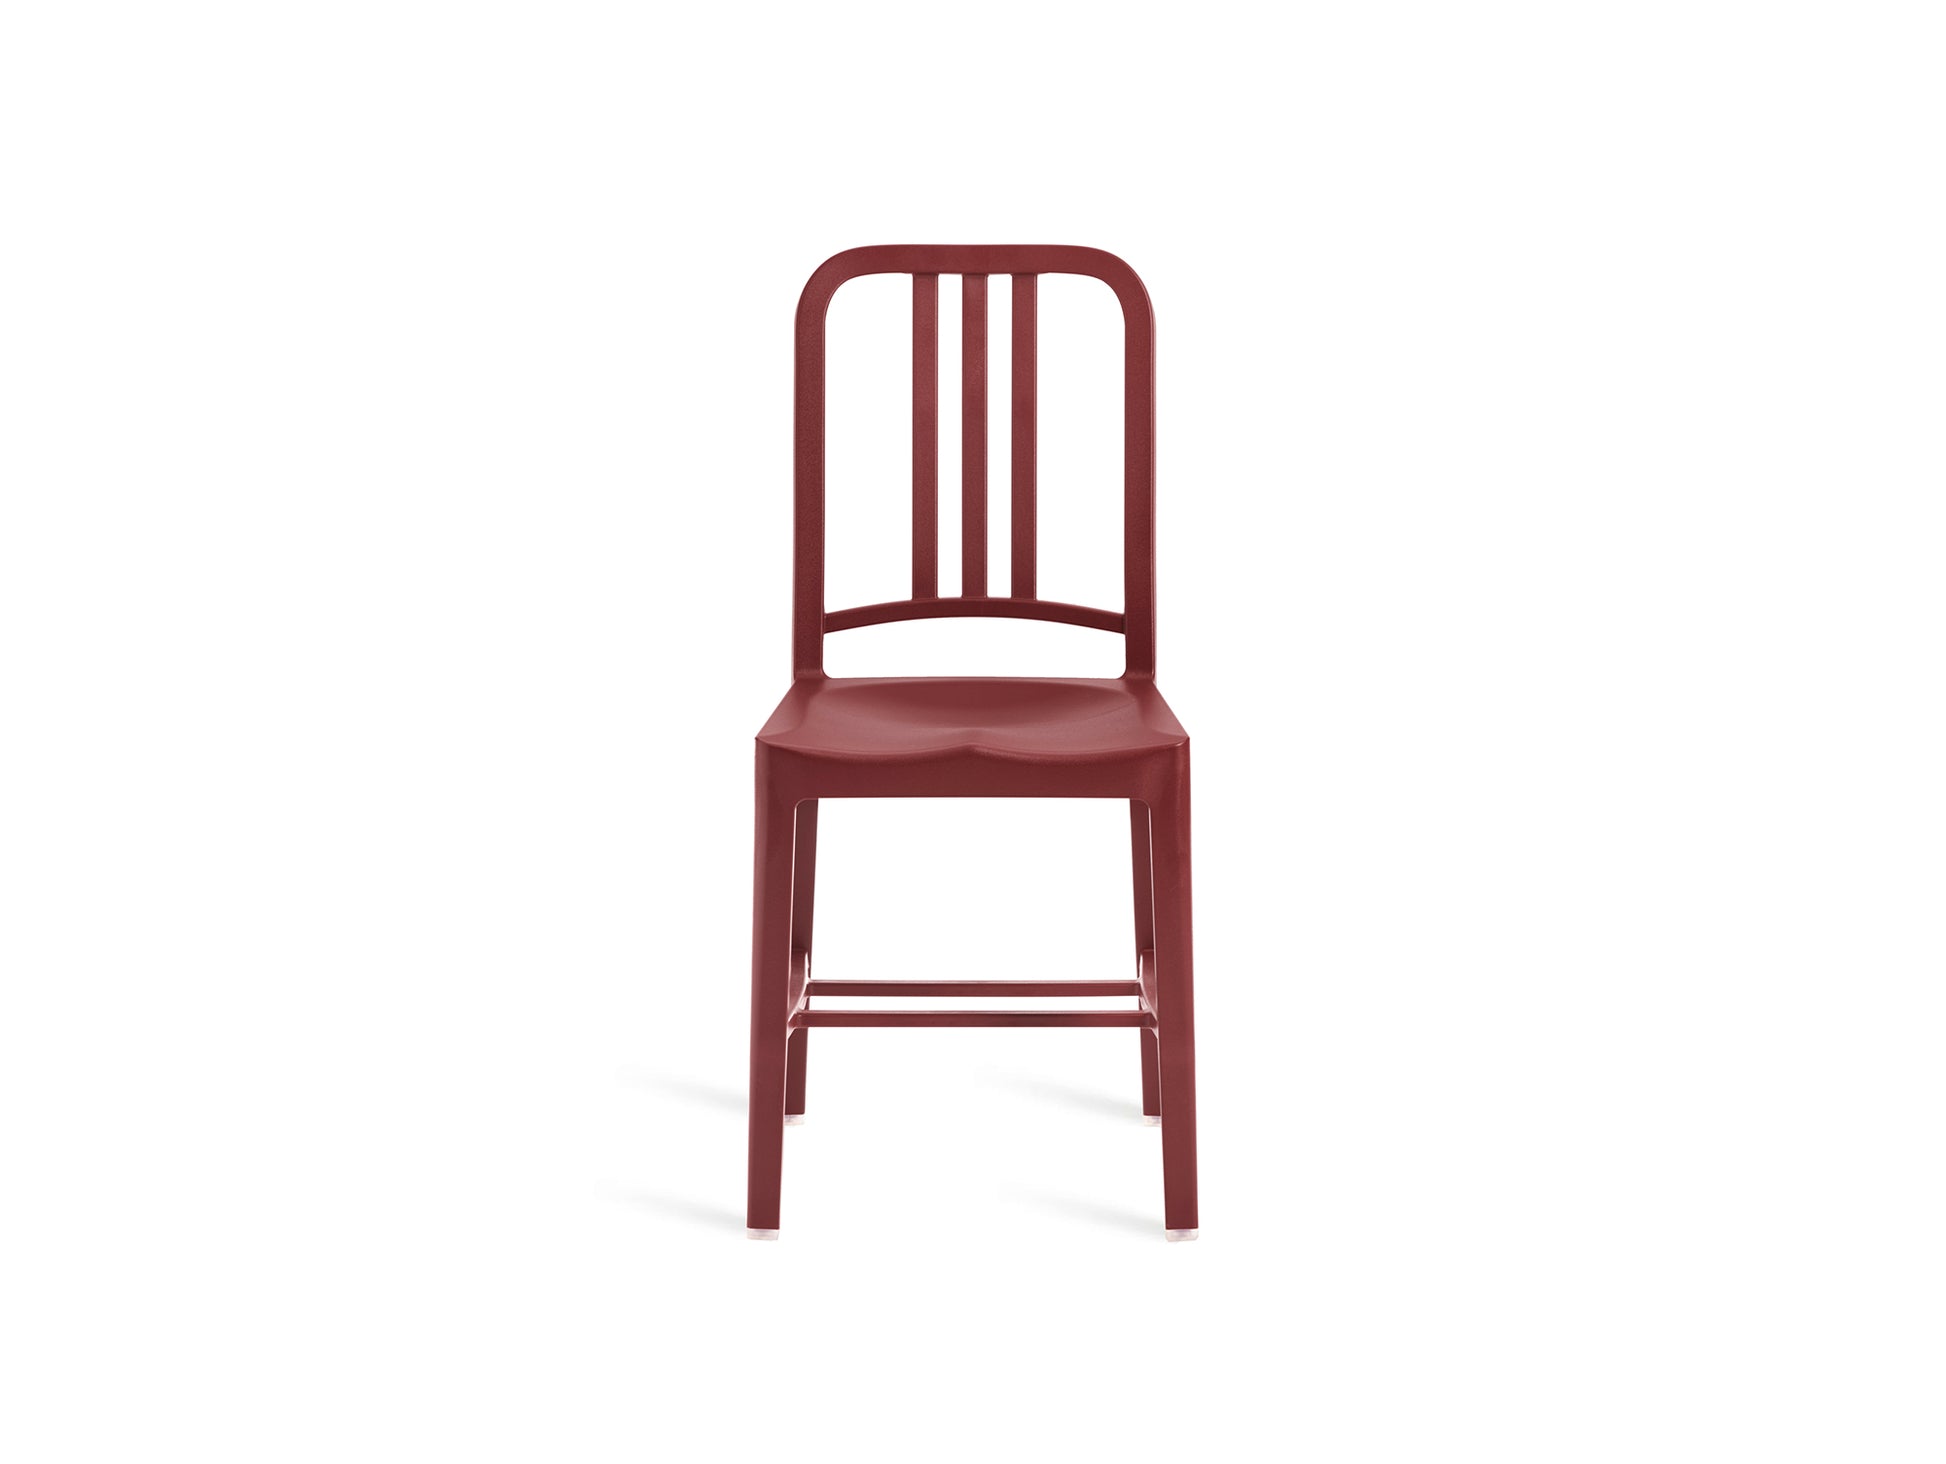 111 Navy Chair by Emeco - Bordeaux